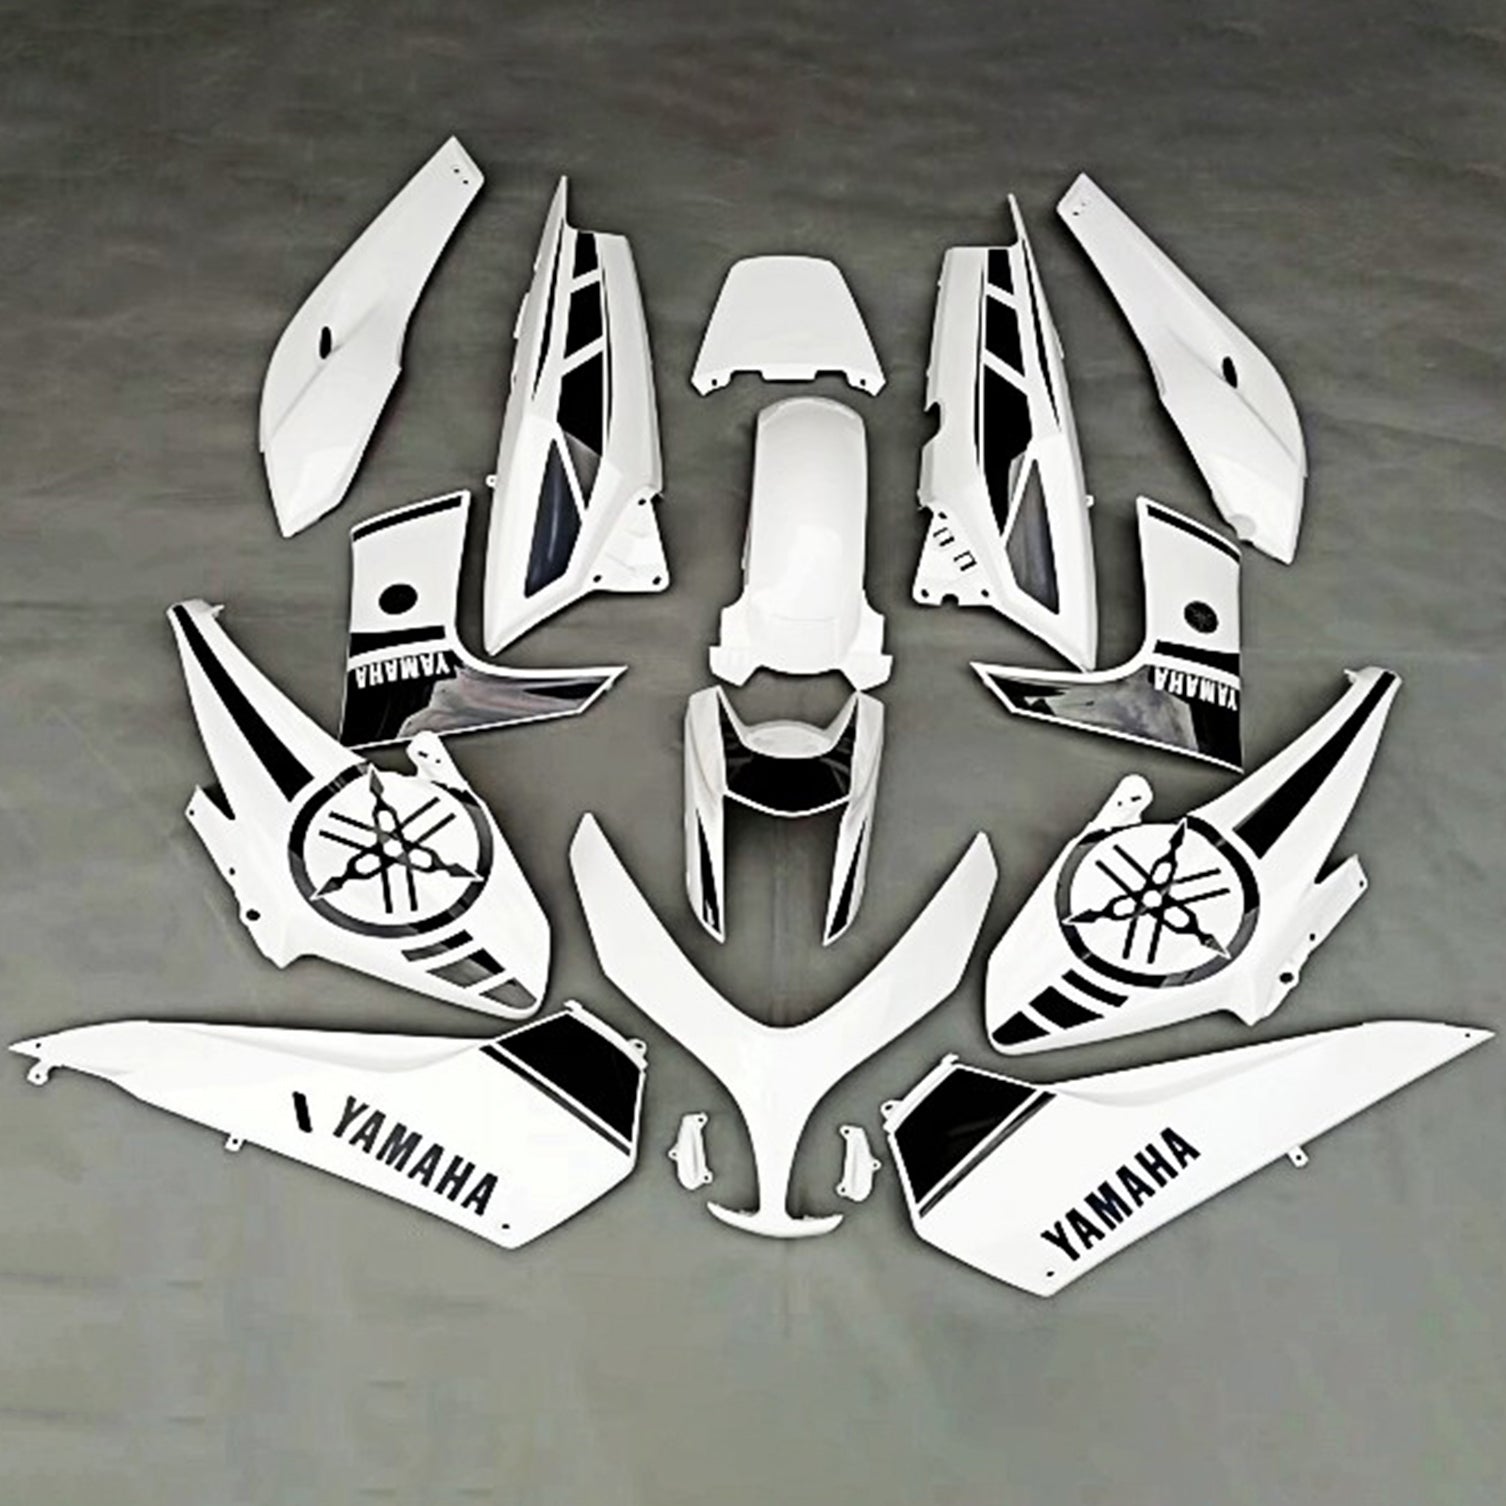 Amotopart 2019-2021 Yamaha TMAX560 Fairing  White with Black Accents Kit